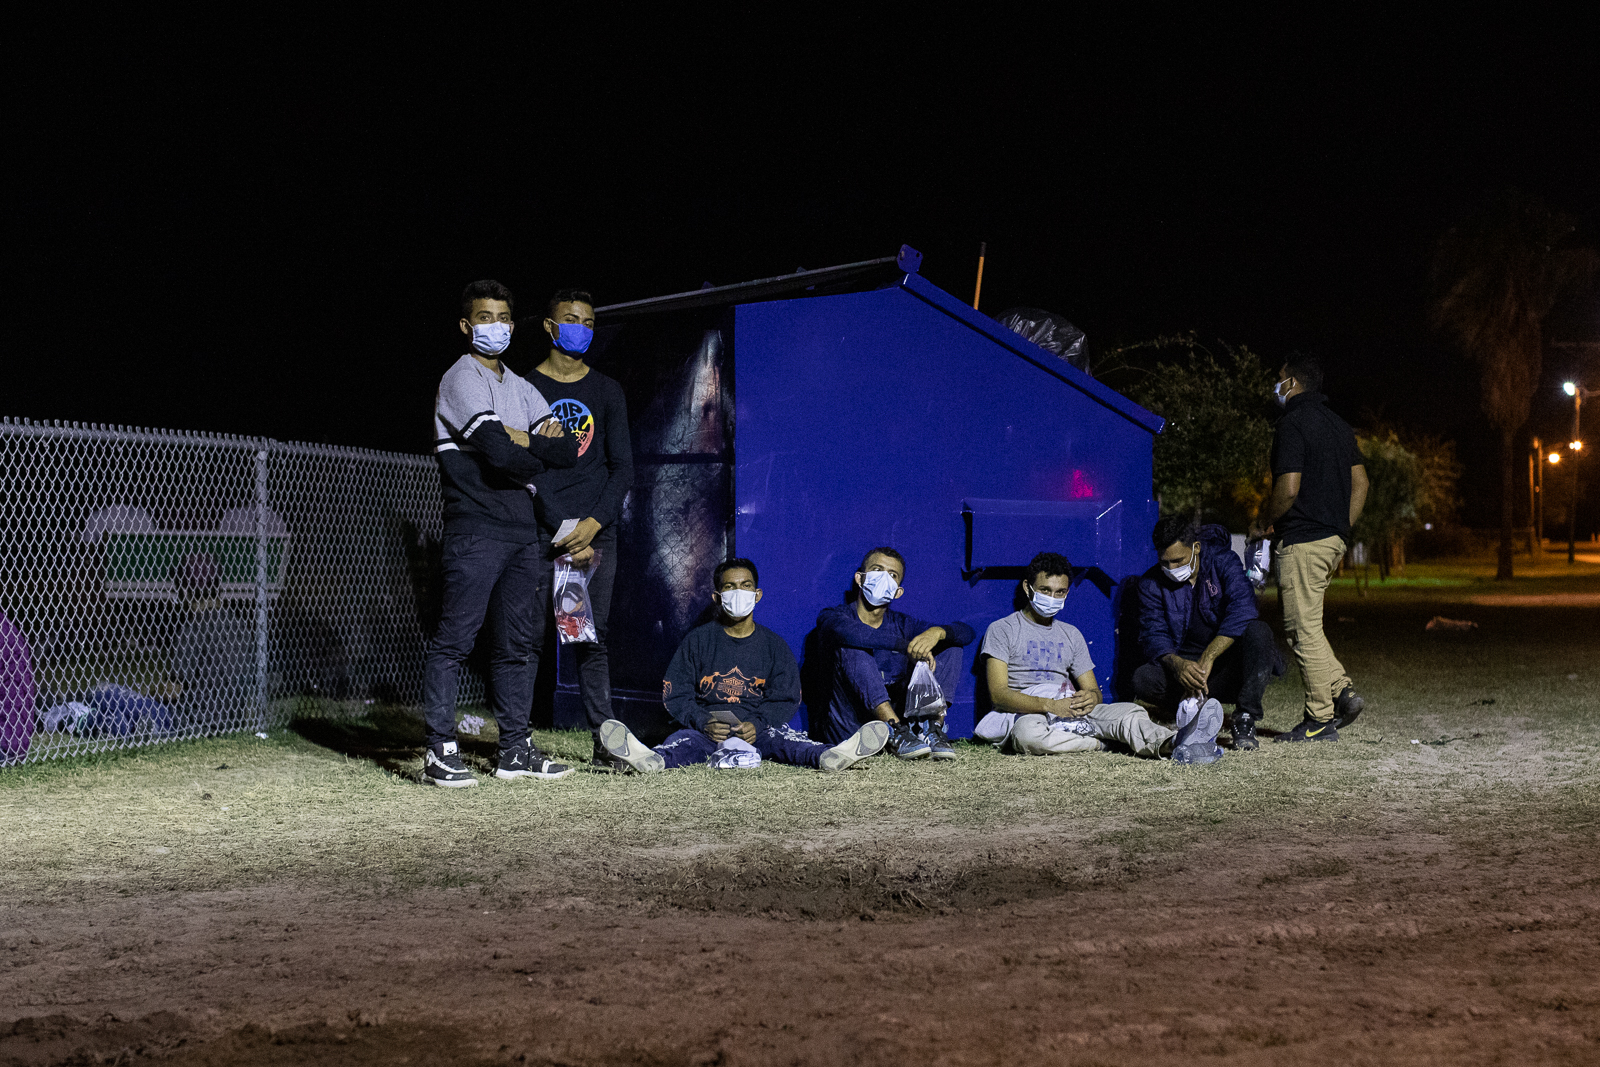 Some migrants traveling in a group consisting of only men attempted to avoid law enforcement officials after illegally entering the U.S. by running into bushes told Border Patrol agents they were 17-years-old after they were apprehended near La Joya, Texas on August 7, 2021. (Kaylee Greenlee - Daily Caller News Foundation)